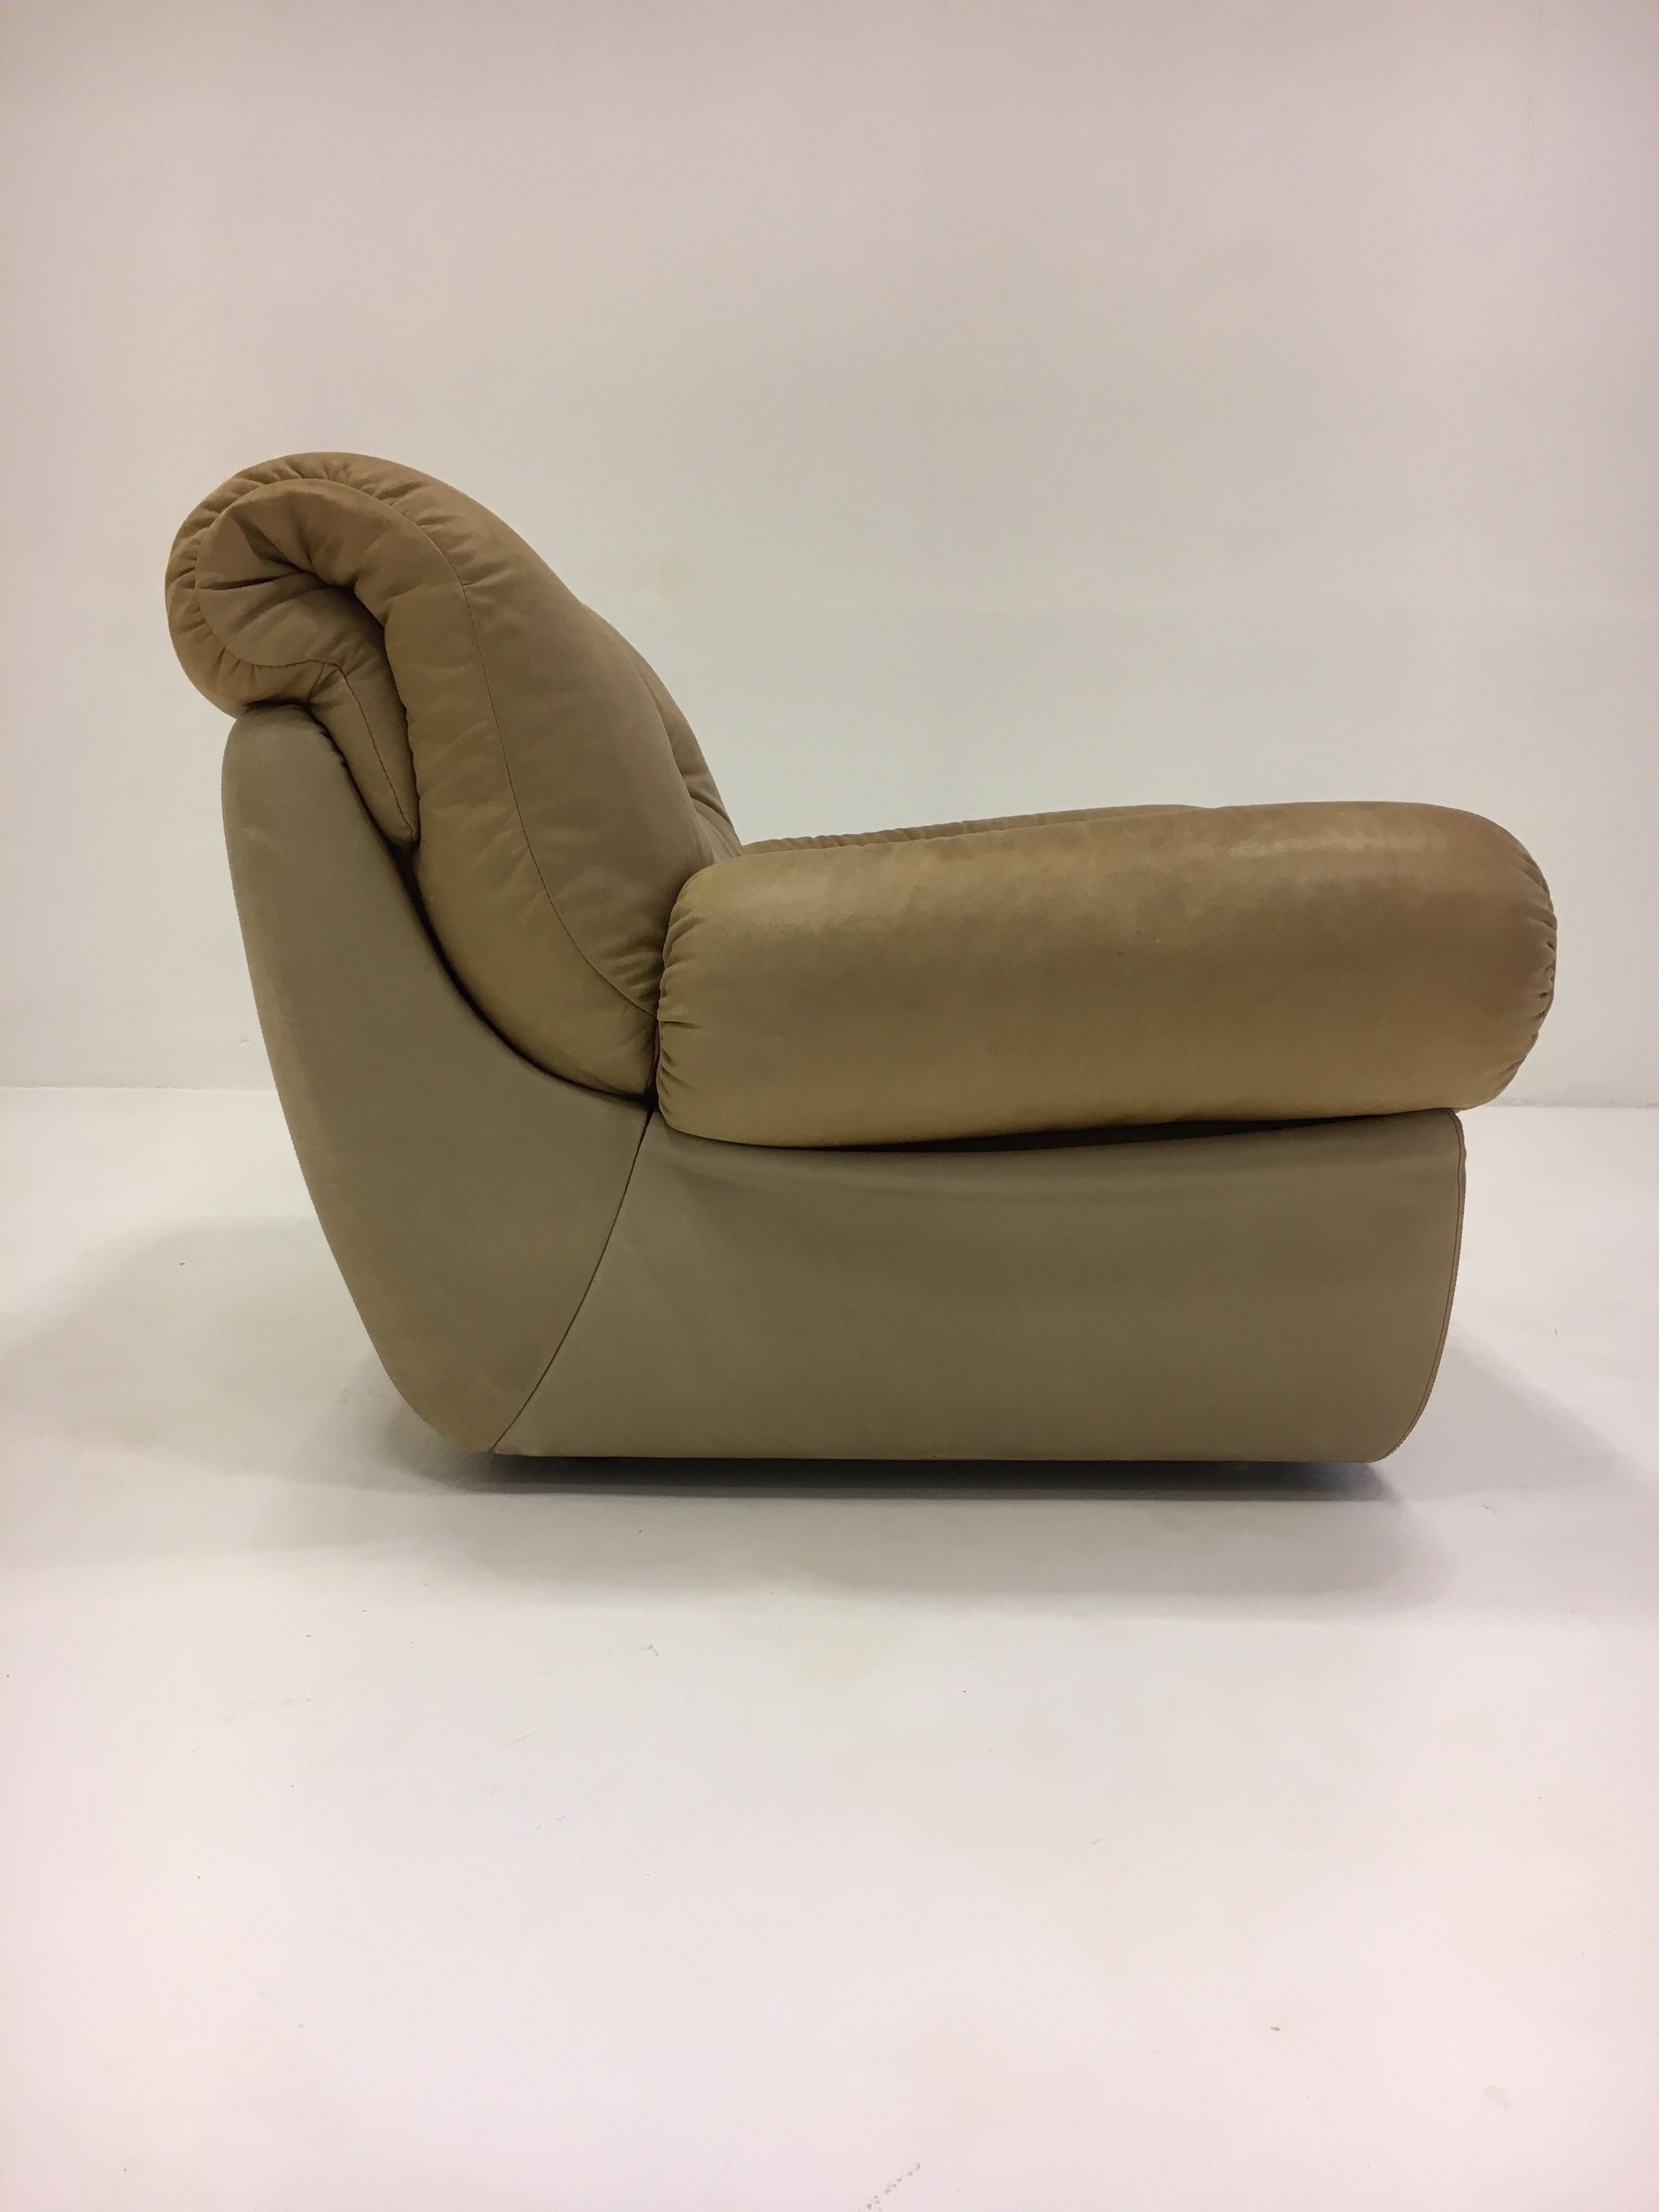 Wittmann, Model 'Chairman' Pair of Lounge Chairs, Patinated Cognac Leather, 1971 For Sale 5